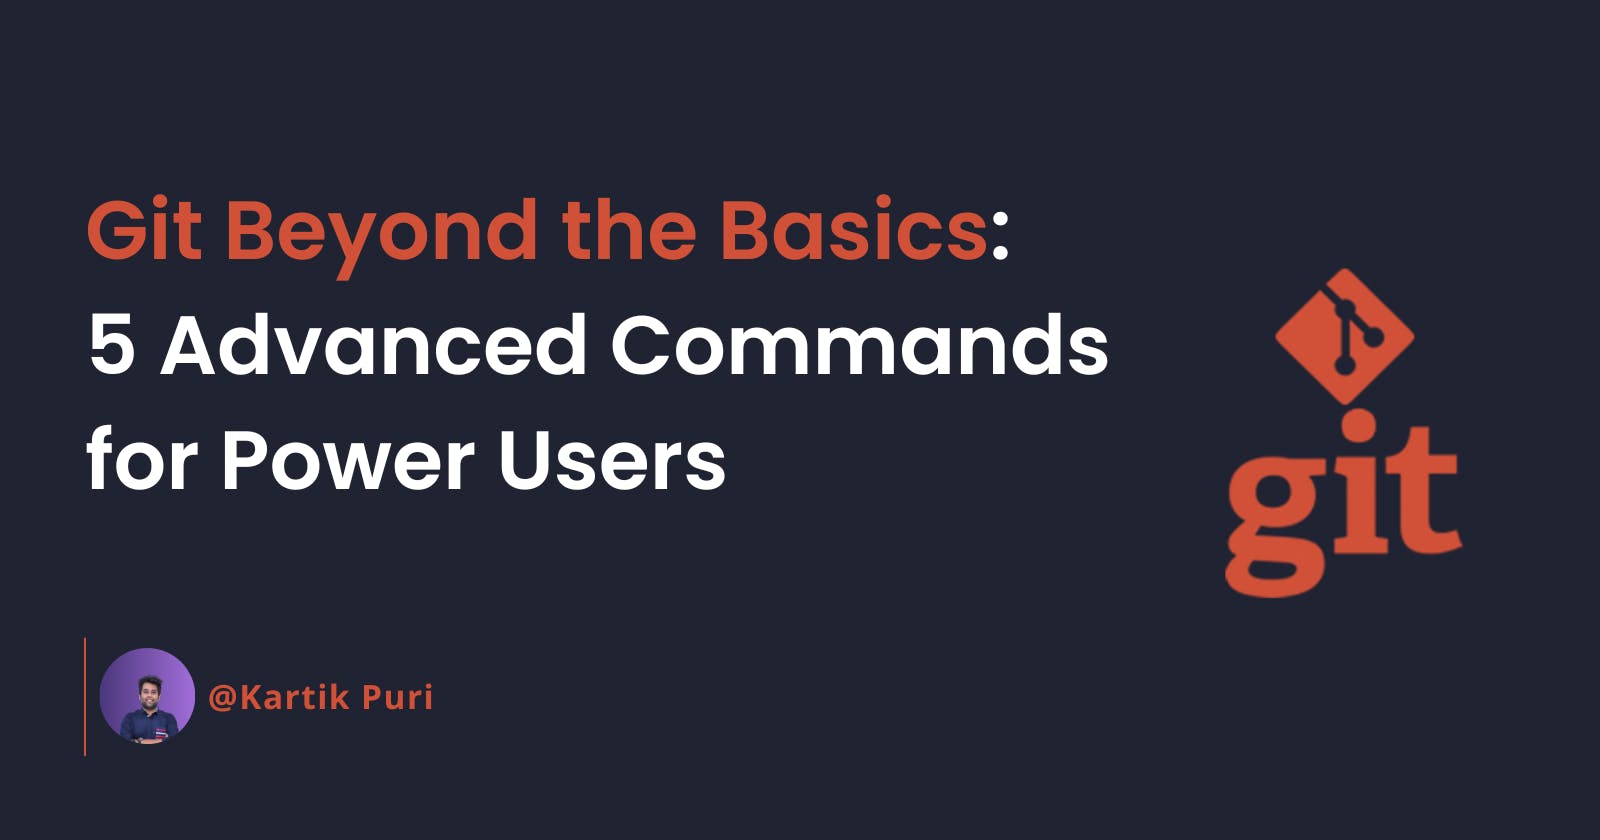 Git Beyond the Basics: 5 Advanced Commands for Power Users